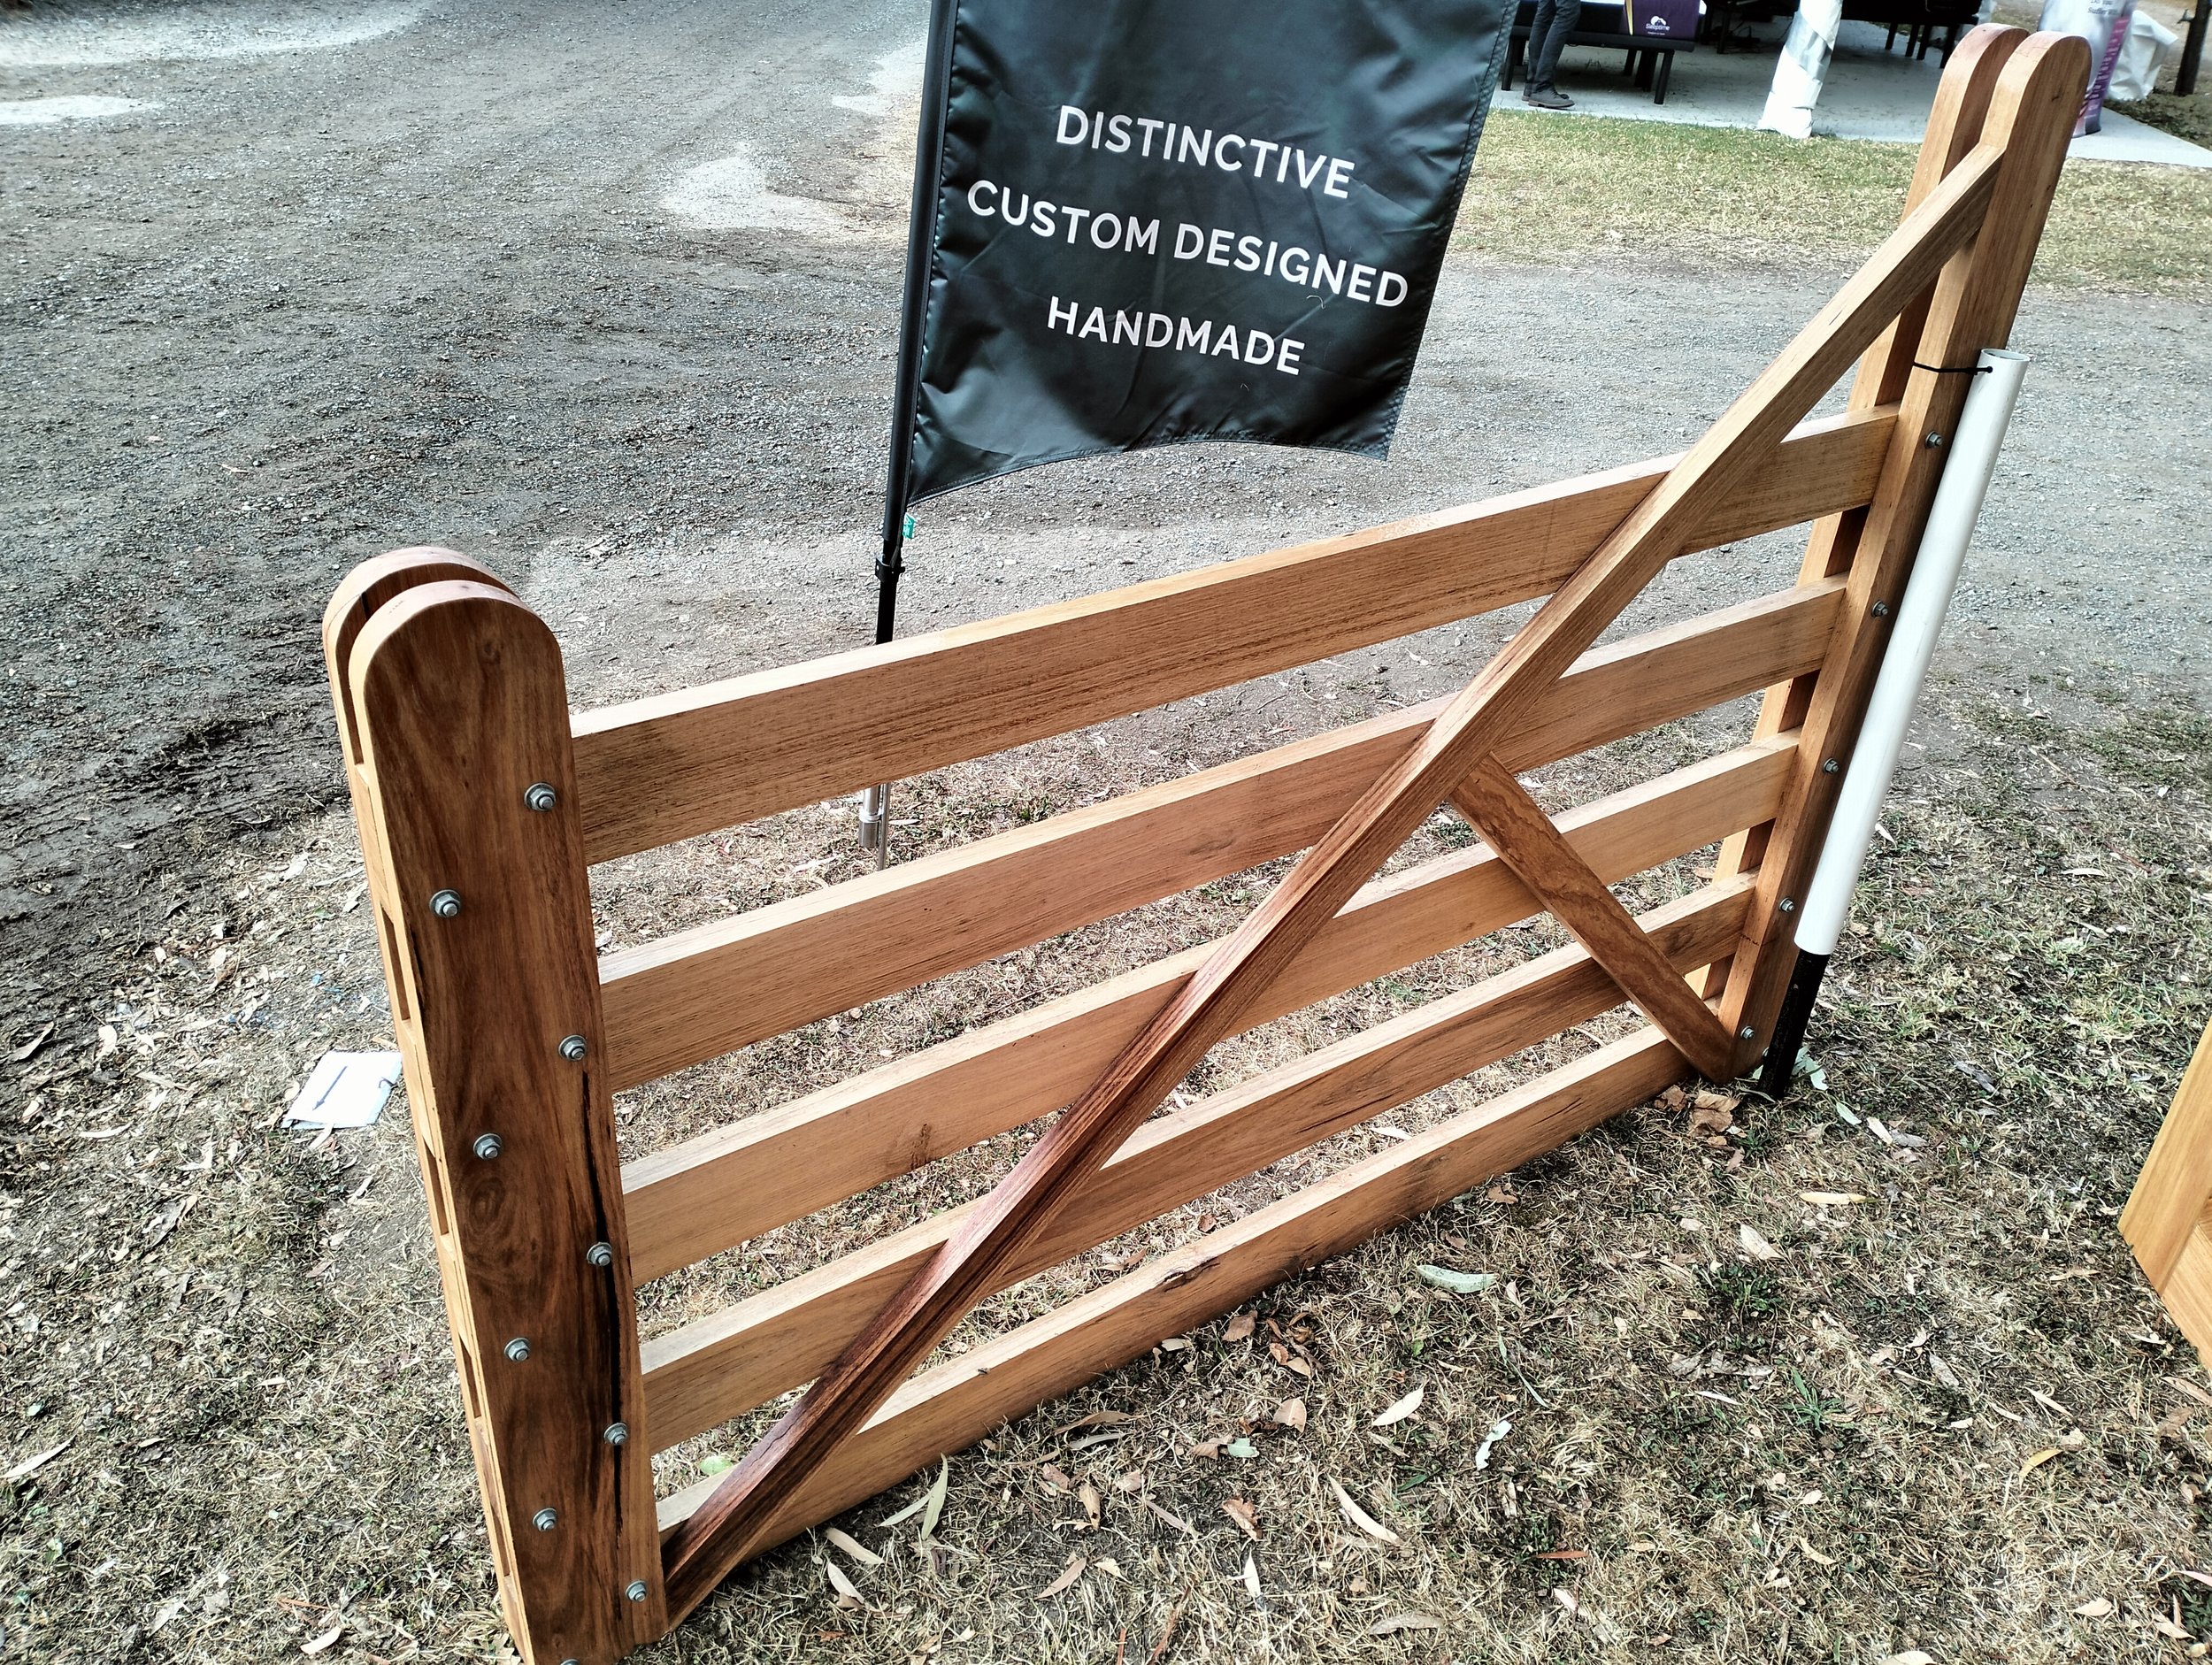 Wooden Gate For Ranches and Farms.jpg